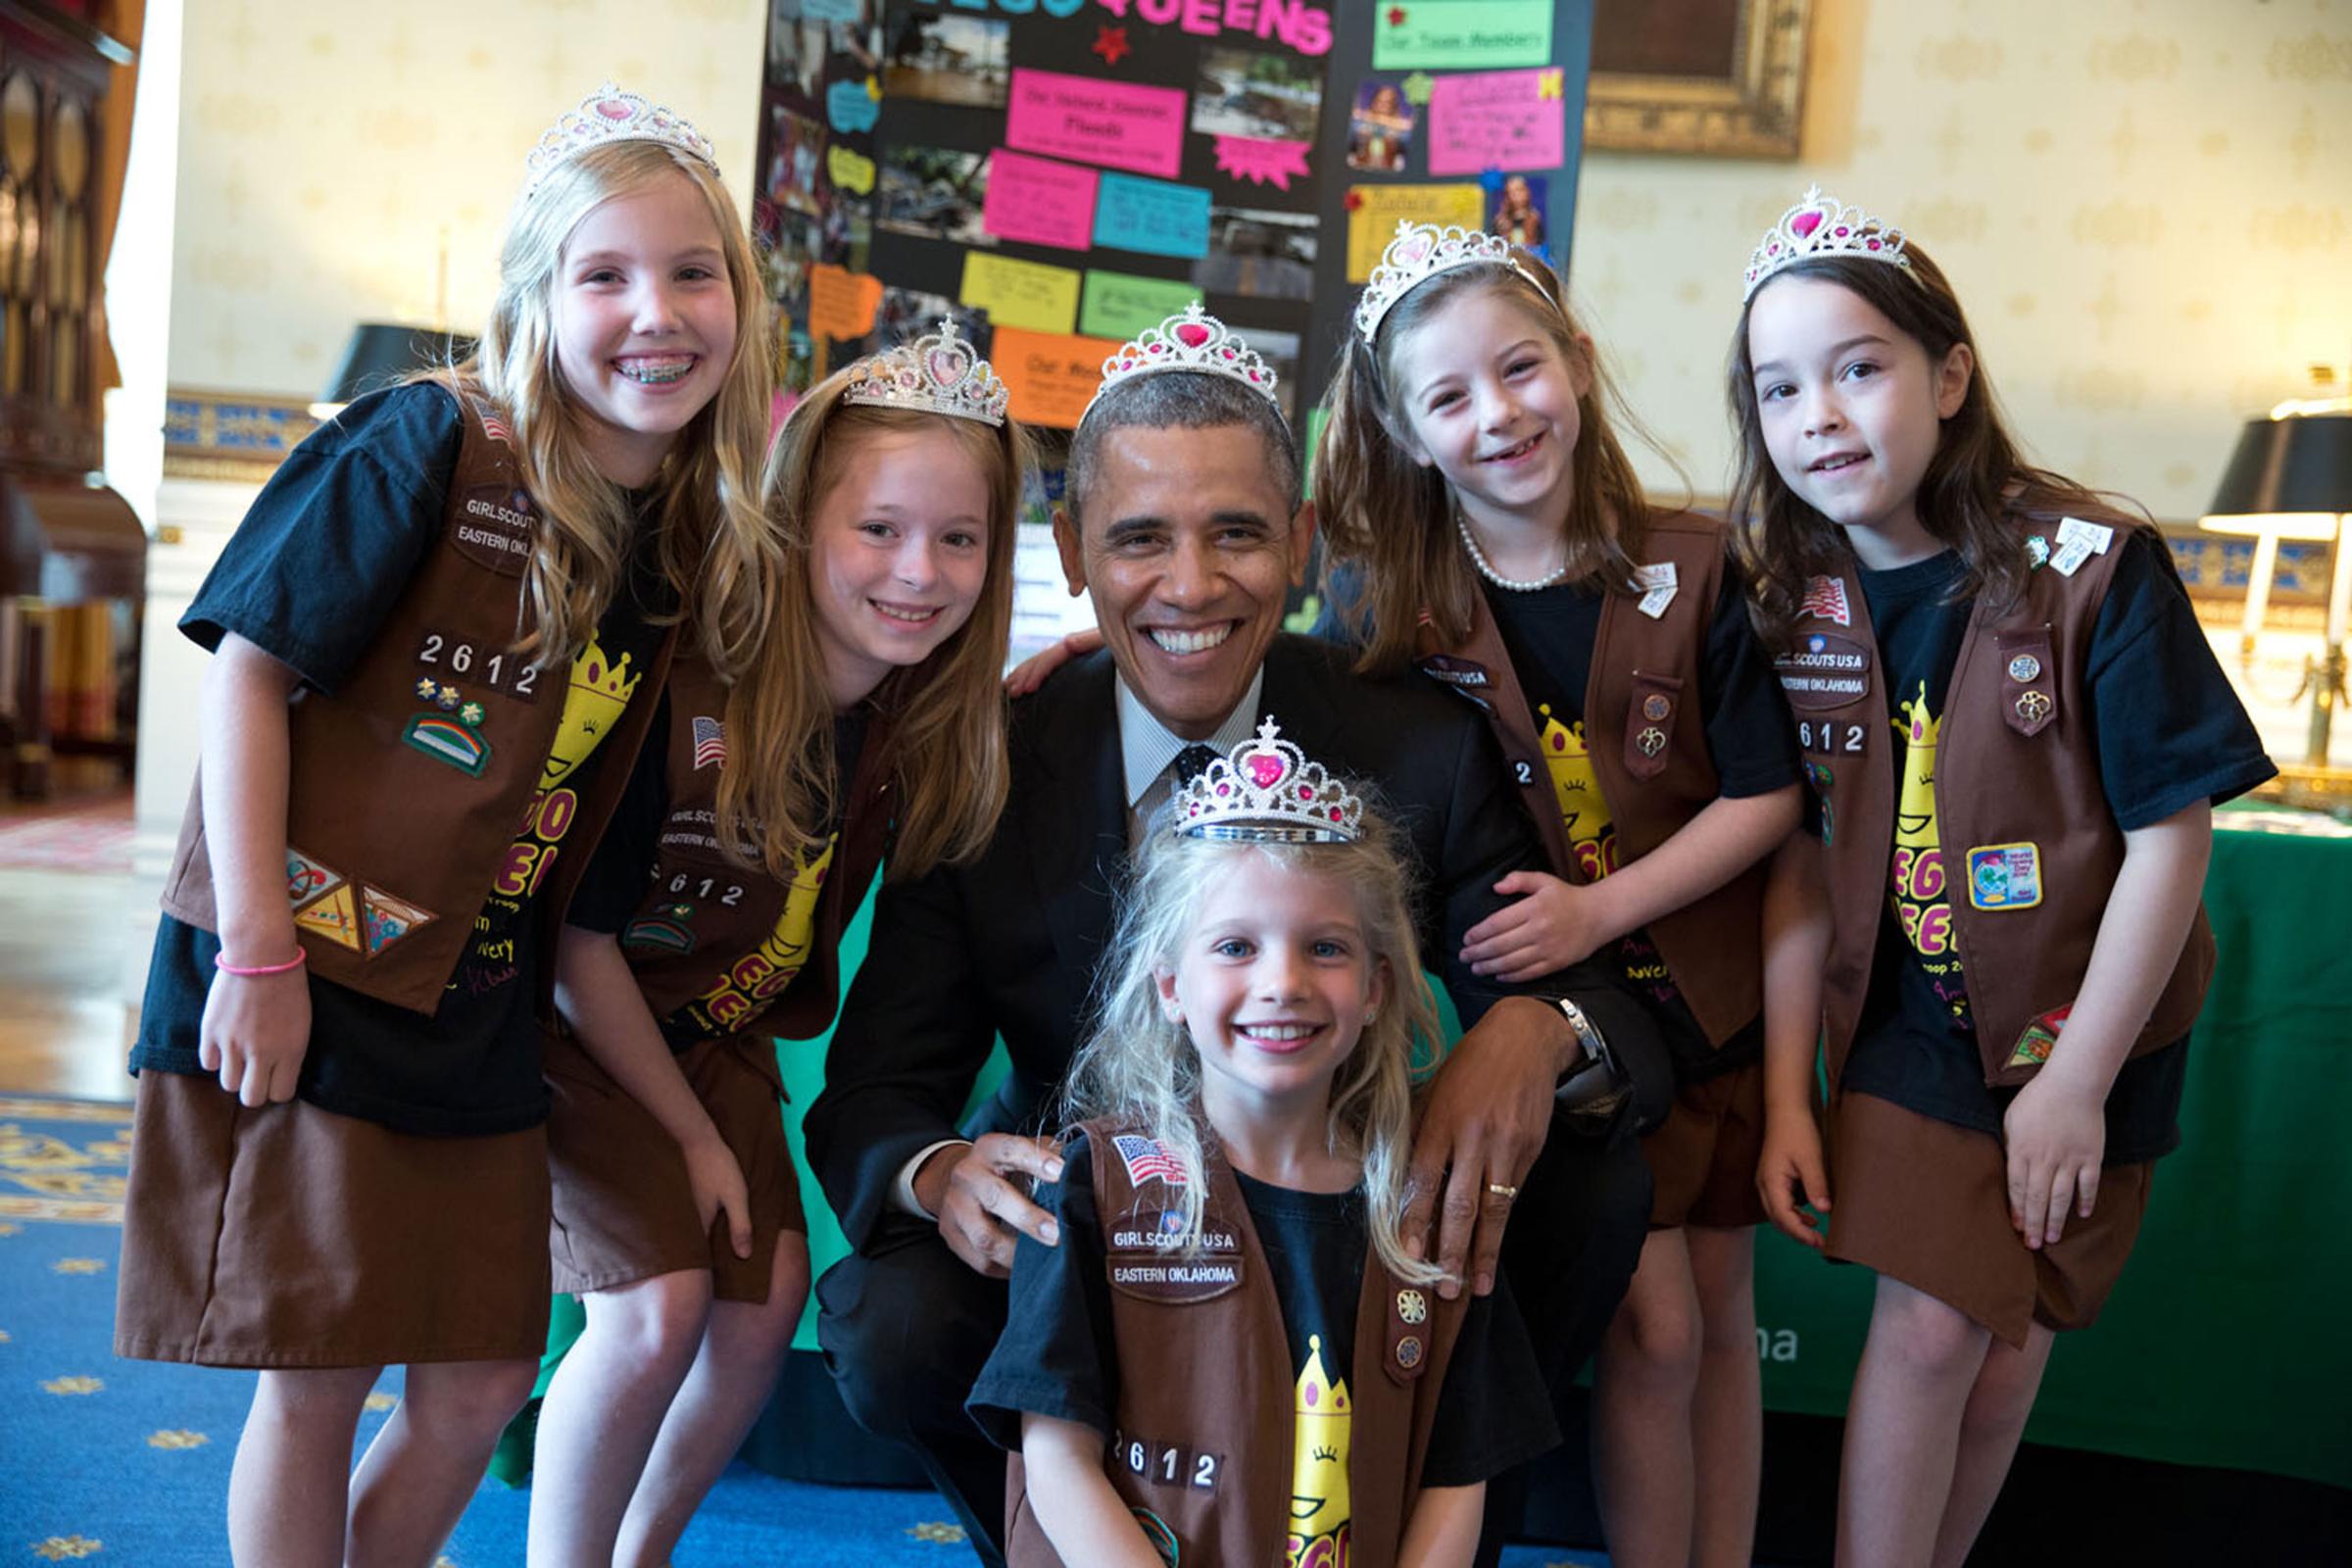 "This photograph was from the annual White House Science Fair. It shows the President posing with Girl Scout Troop 2612 from Tulsa, Oklahoma. I think the 8-year-old girls — Avery Dodson, Natalie Hurley, Miriam Schaffer, Claibyre Winton and Lucy Claire Sharp — are called 'Brownies.' They had just shown the President their exhibit: a Lego flood-proof bridge project. The fair celebrated the student winners of a broad range of science, technology, engineering, and math (STEM) competitions from across the country, May 24, 2014.